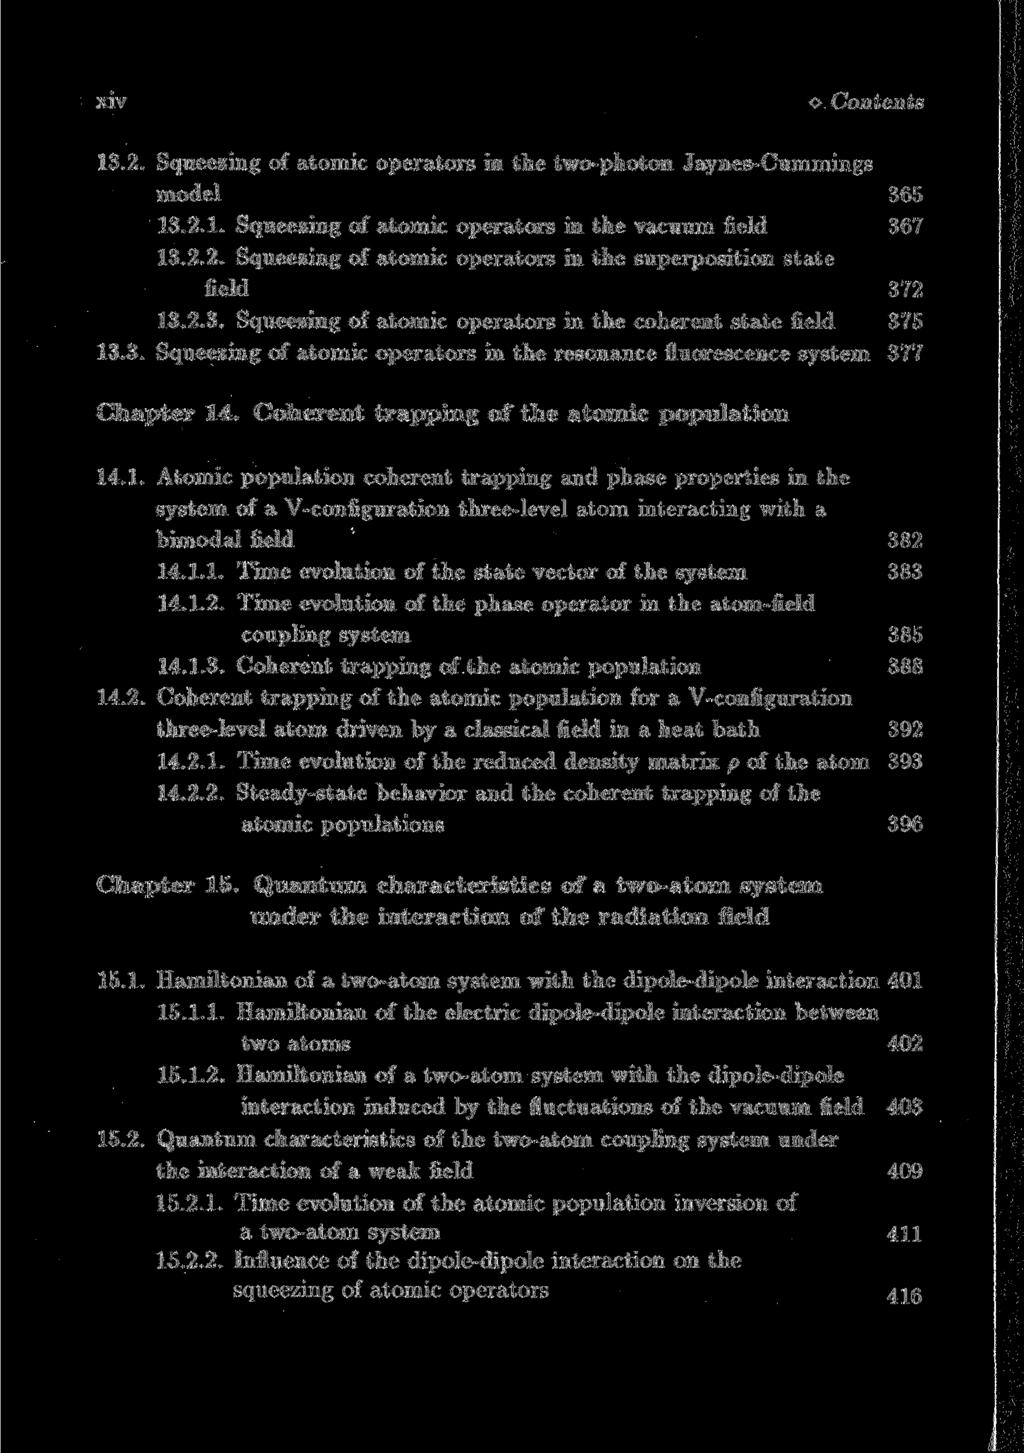 XIV Contents 13.2. Squeezing of atomic operators in the two-photon Jaynes-Cummings model 365 13.2.1. Squeezing of atomic operators in the vacuum field 367 13.2.2. Squeezing of atomic operators in the superposition state field 372 13.